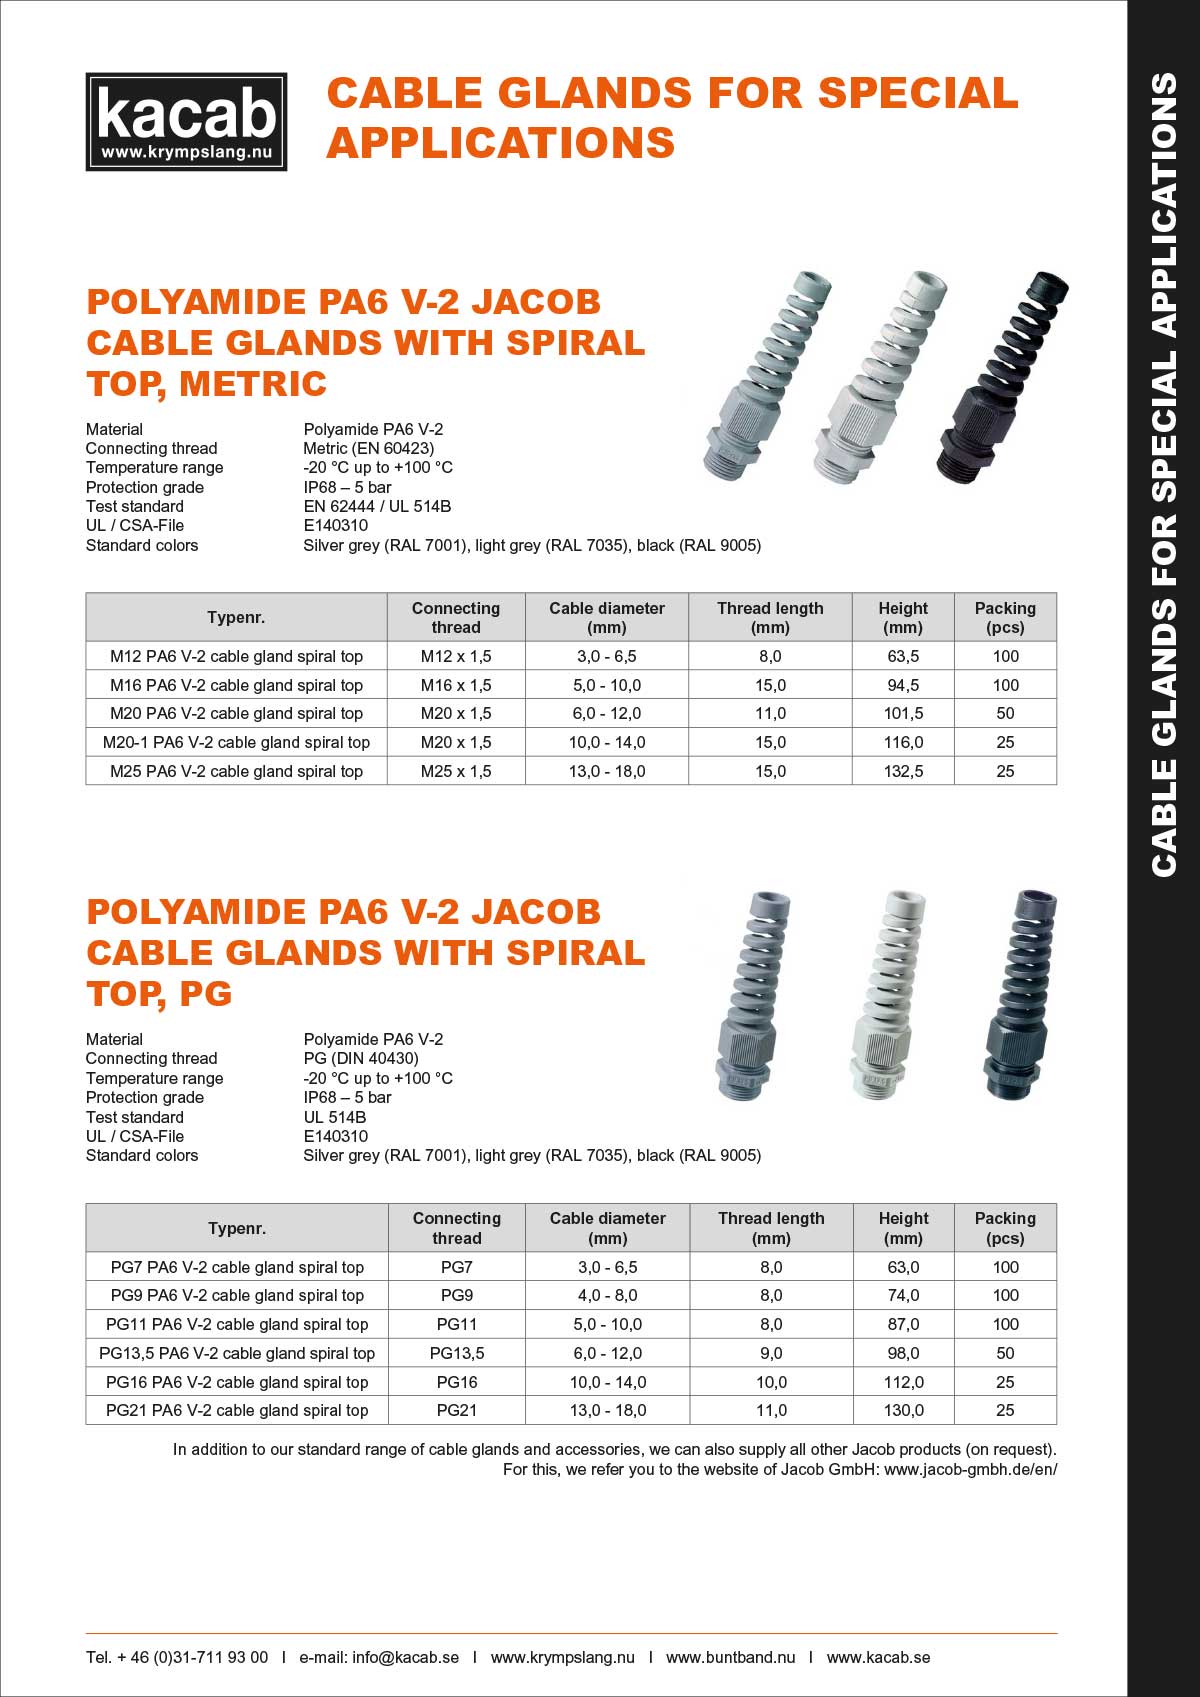 Polyamide PA6 V-2 Jacob cable glands with spiral top - Metric